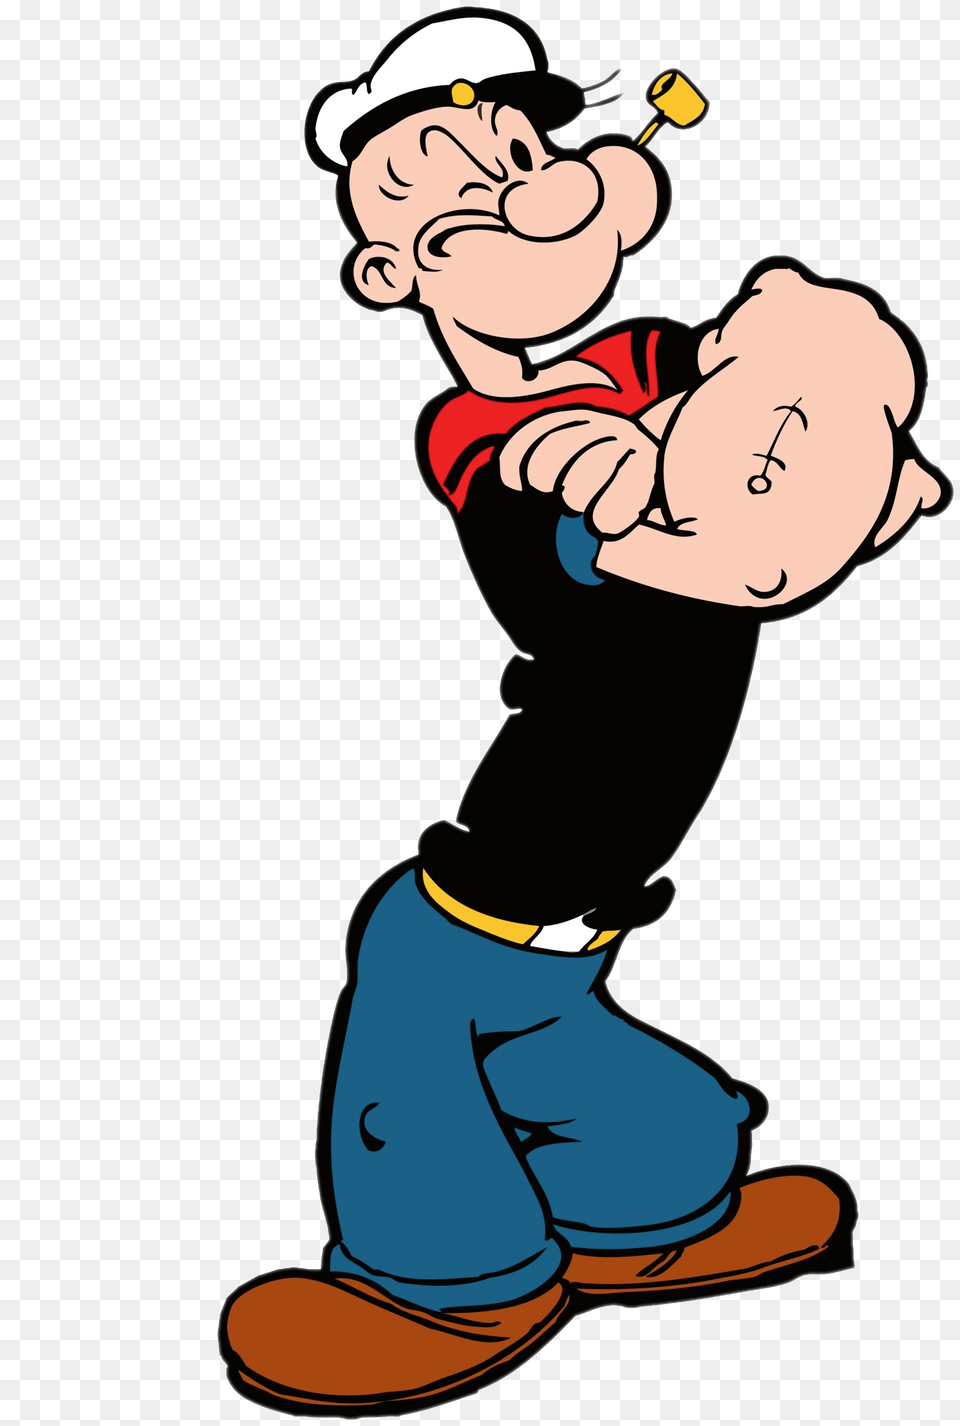 Popeye Arms Crossed, Cartoon, Baby, Person, Clothing Png